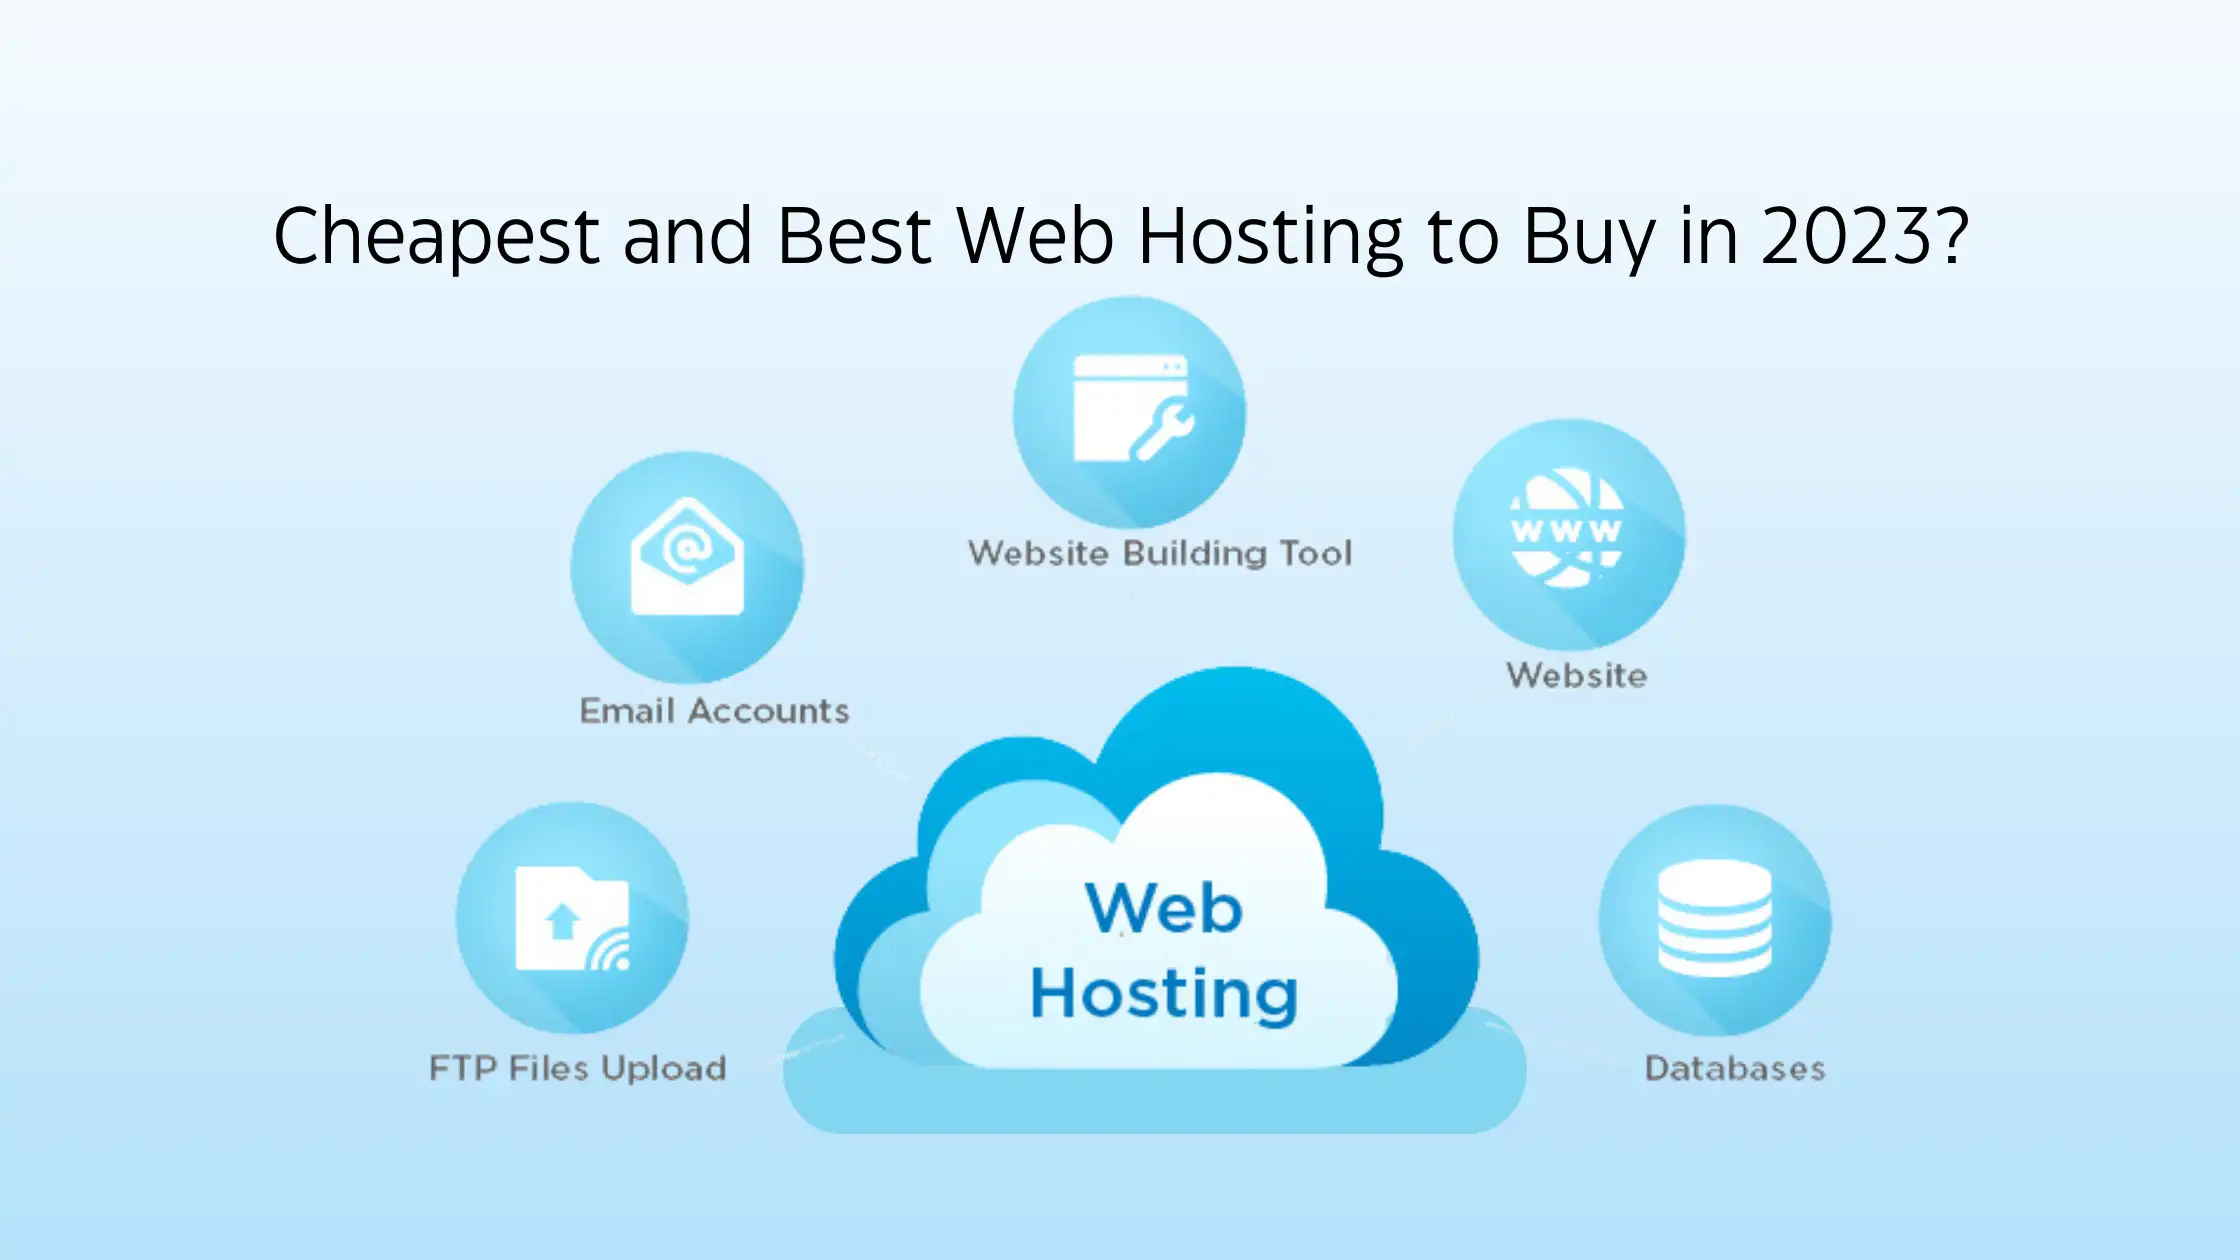 Cheapest and Best Web Hosting to Buy in 2023